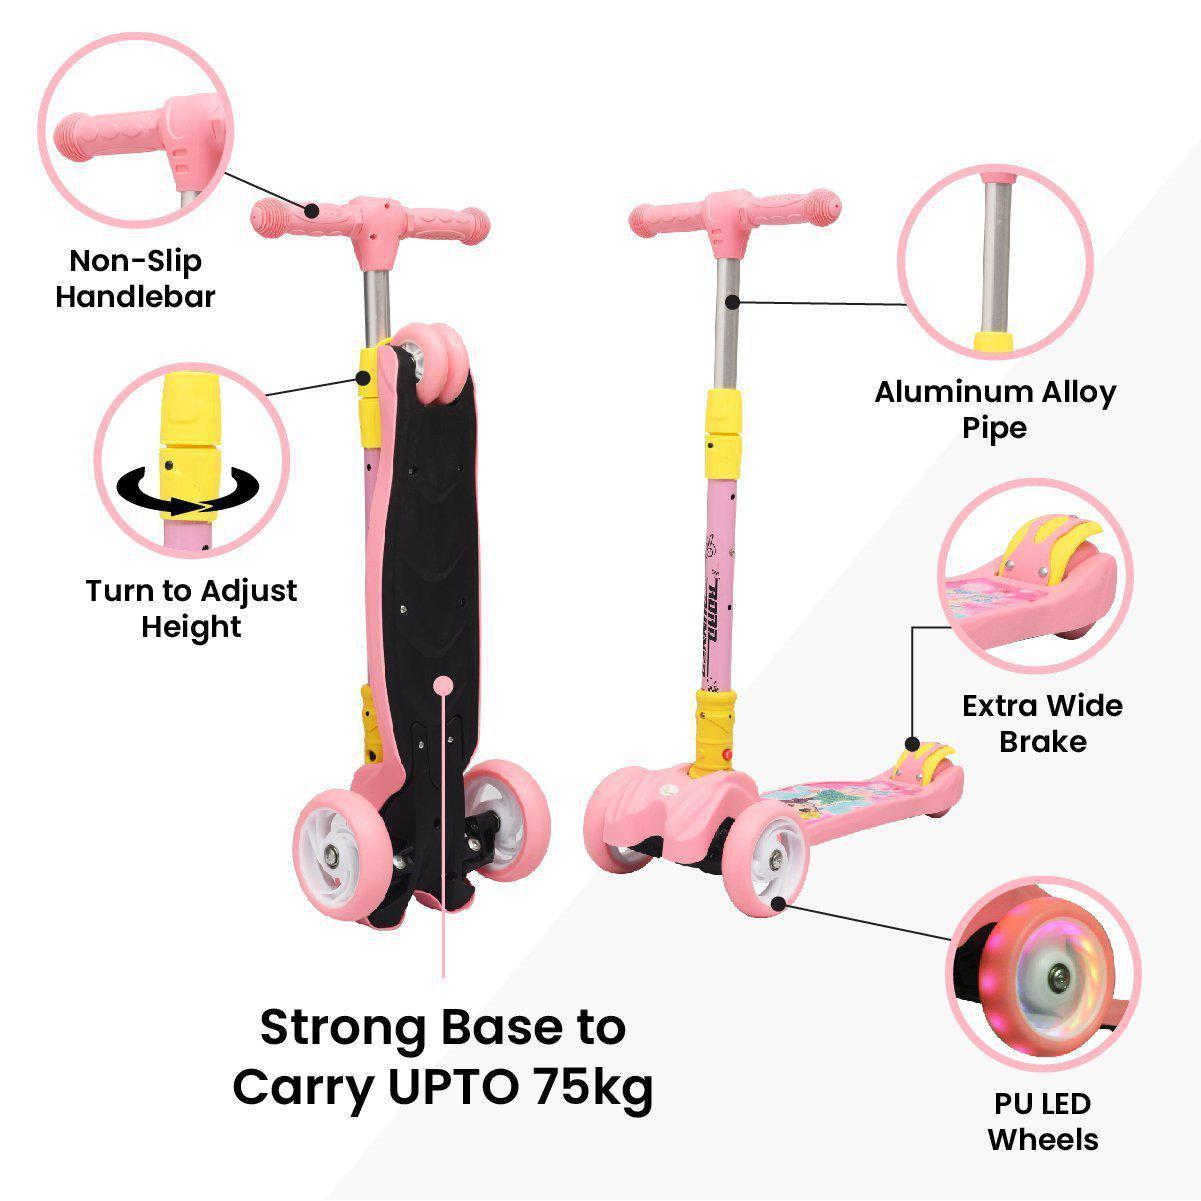 R for Rabbit Road Runner Scooter for Kids - The Smart Kick Scooter for Kids